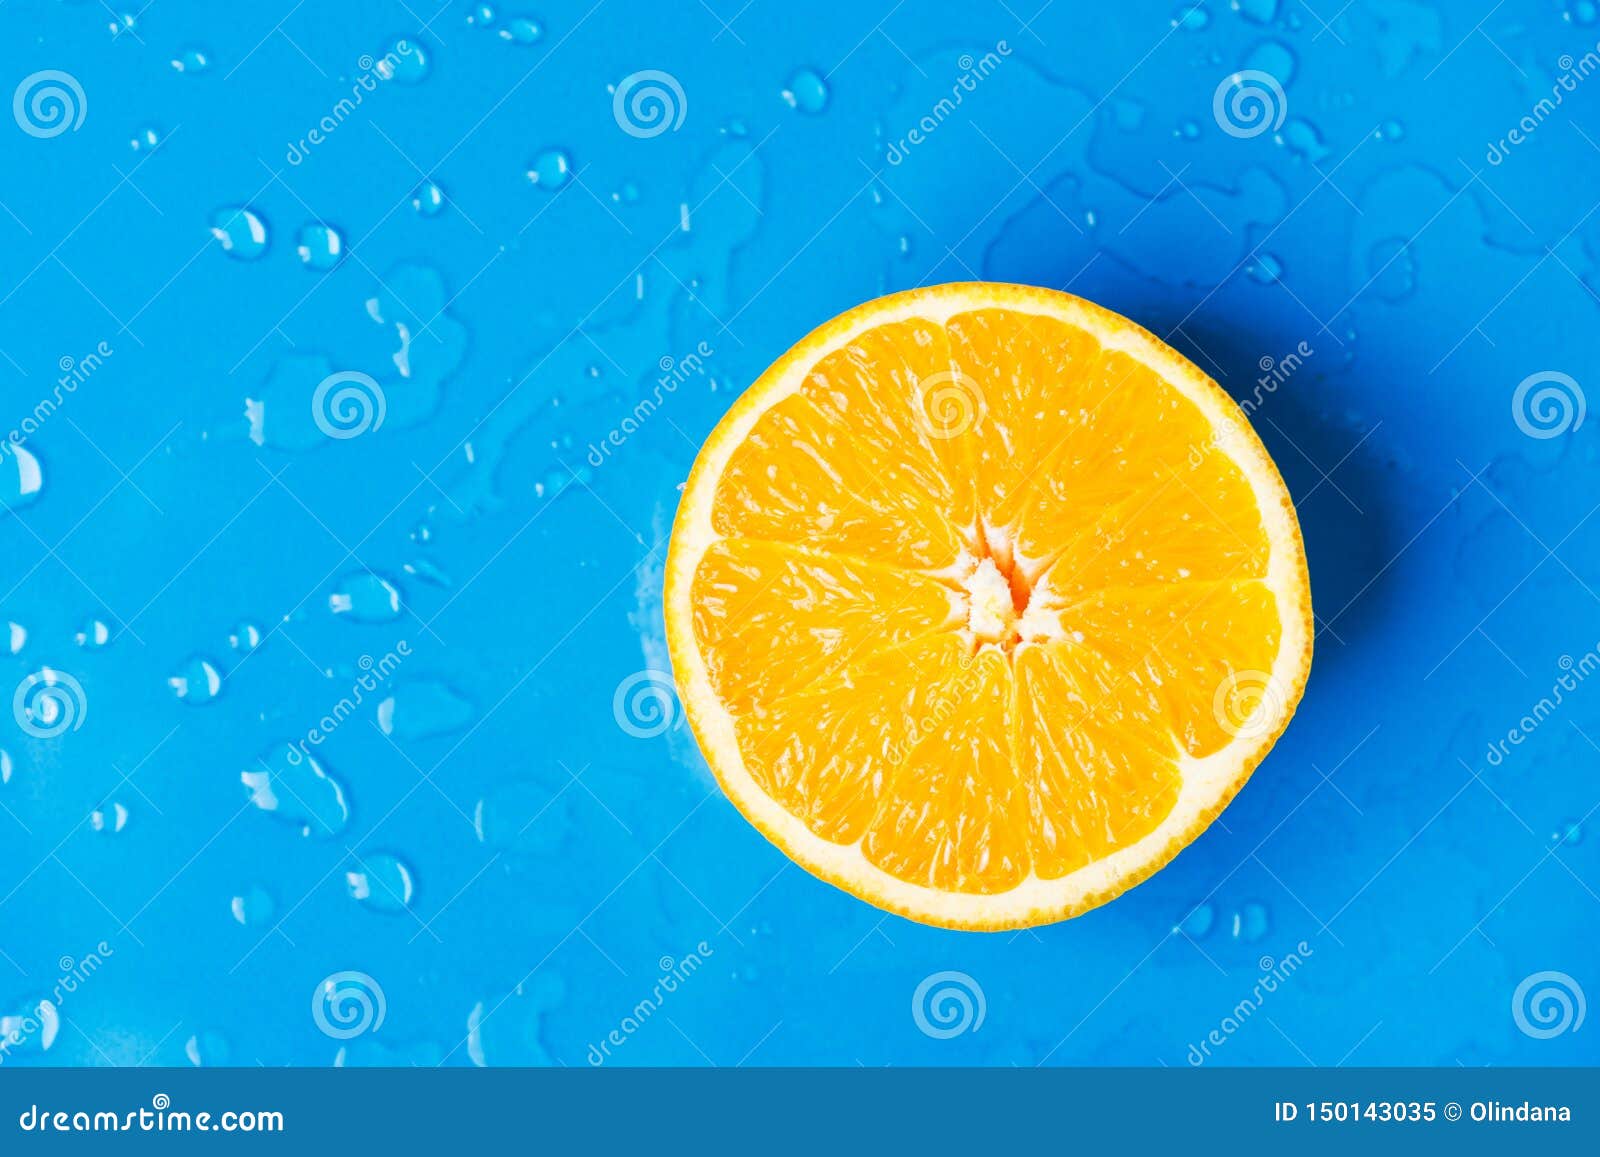 raw juicy citrus fruit cut in half orange on wet blue background with water drops splashes. summer beverages refreshments drinks